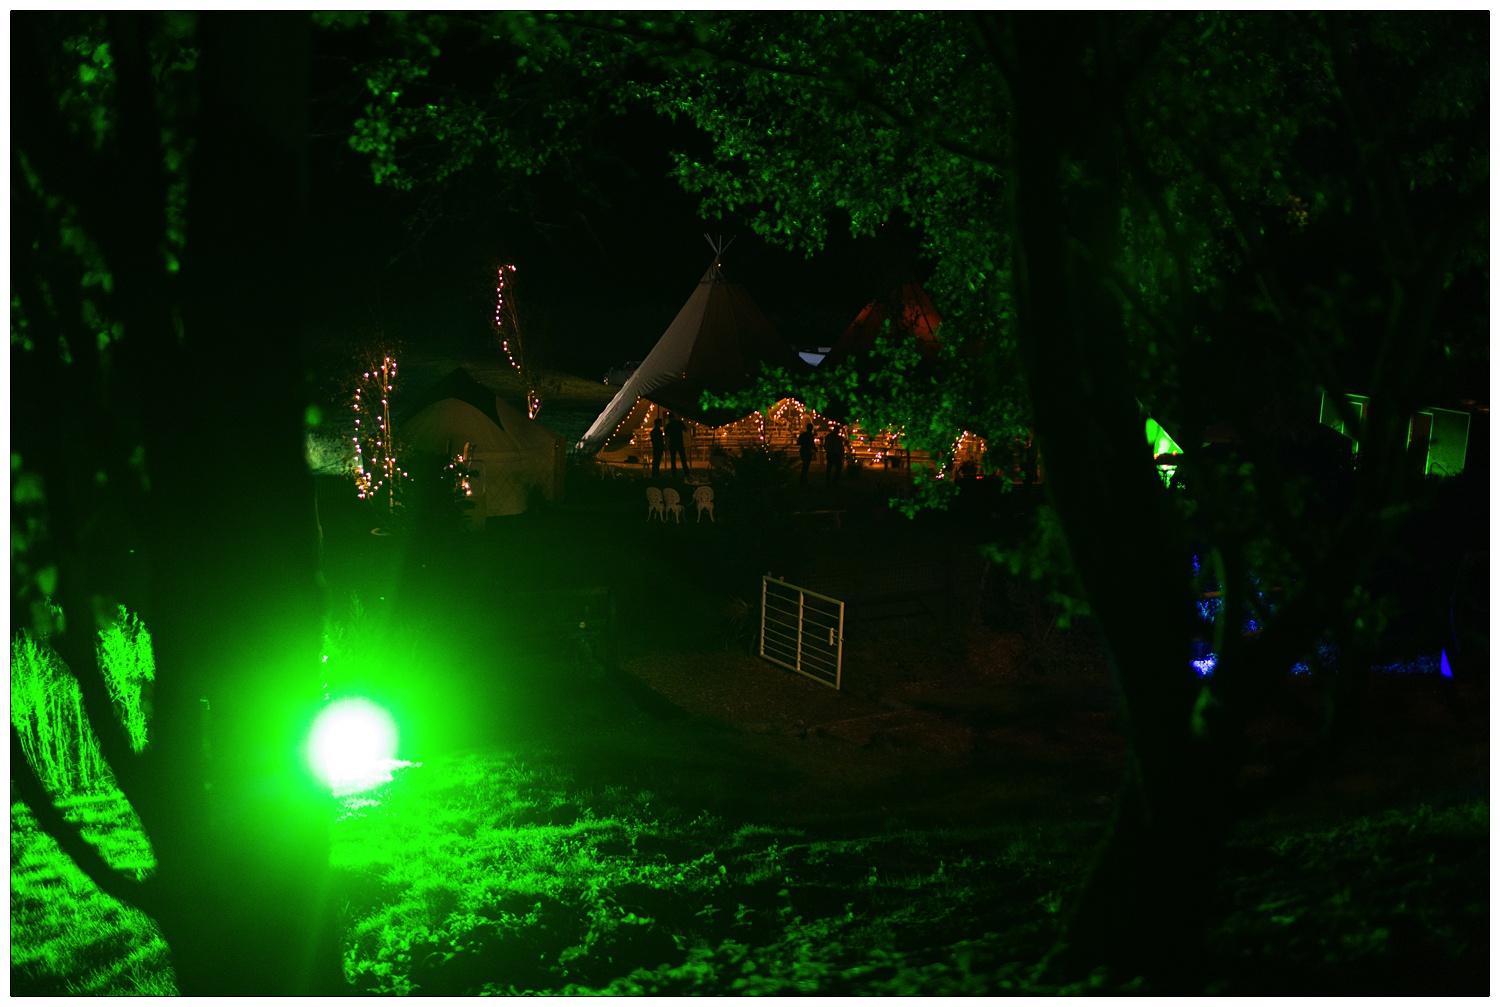 Up a hill looking down the view of a festival themed wedding. A tipi and yurt, there is green lighting by a tree.